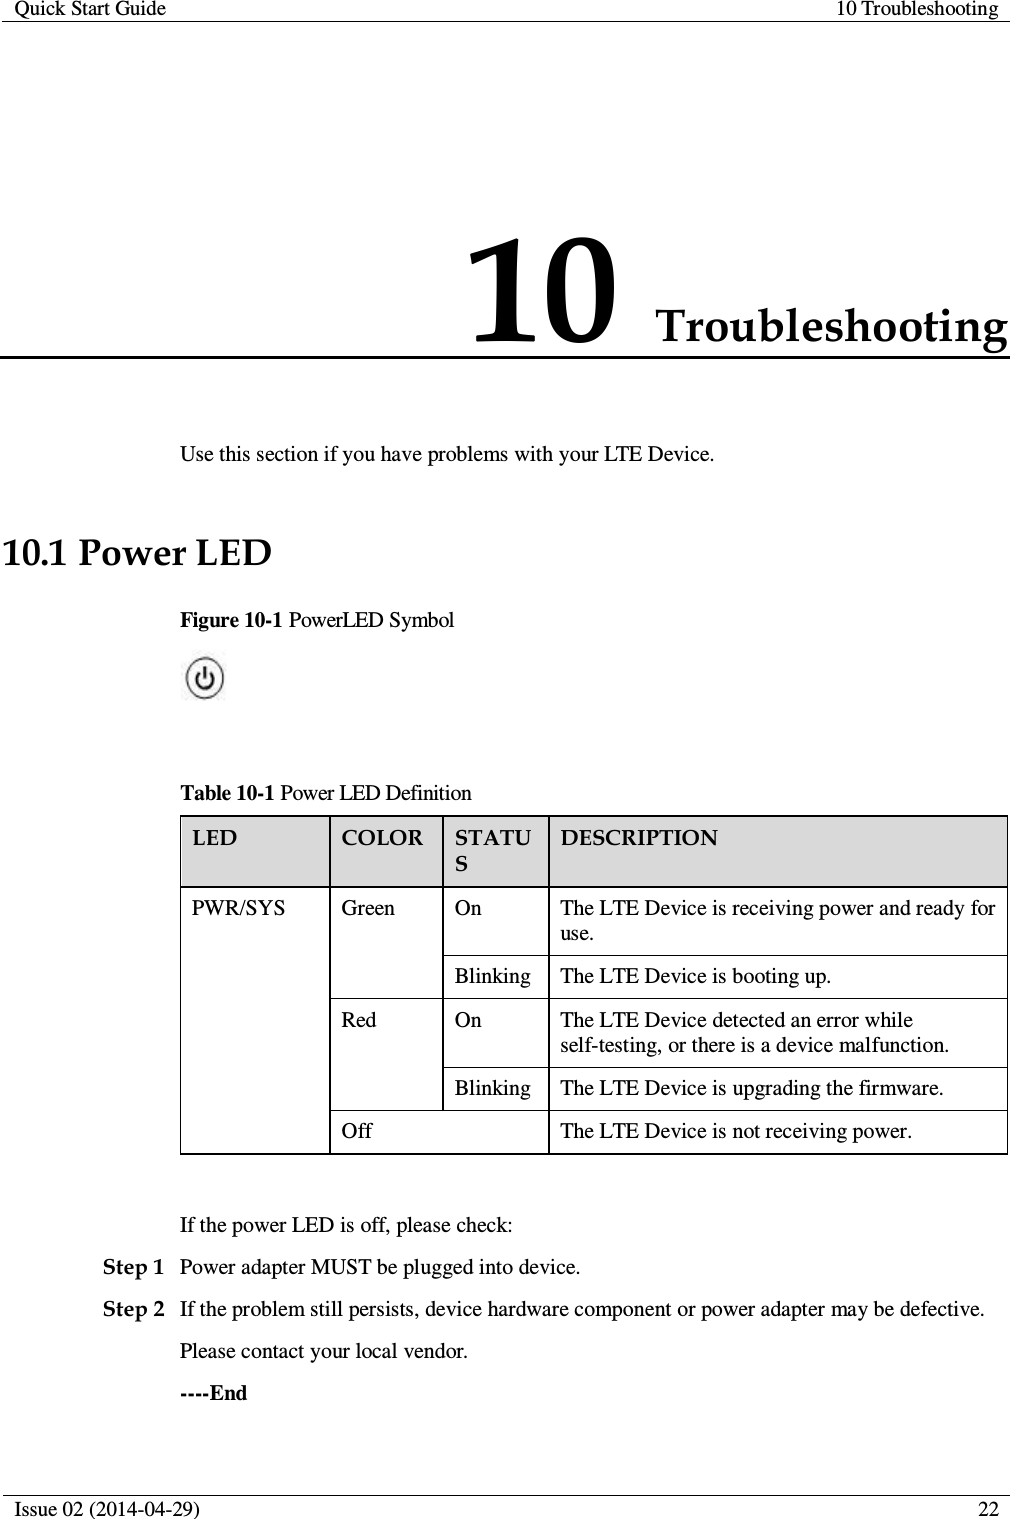 Quick Start Guide 10 Troubleshooting  Issue 02 (2014-04-29)  22  10 Troubleshooting Use this section if you have problems with your LTE Device. 10.1 Power LED Figure 10-1 PowerLED Symbol   Table 10-1 Power LED Definition LED COLOR STATUS DESCRIPTION PWR/SYS Green On The LTE Device is receiving power and ready for use. Blinking The LTE Device is booting up. Red On The LTE Device detected an error while self-testing, or there is a device malfunction. Blinking The LTE Device is upgrading the firmware. Off The LTE Device is not receiving power.  If the power LED is off, please check: Step 1 Power adapter MUST be plugged into device. Step 2 If the problem still persists, device hardware component or power adapter may be defective. Please contact your local vendor. ----End 